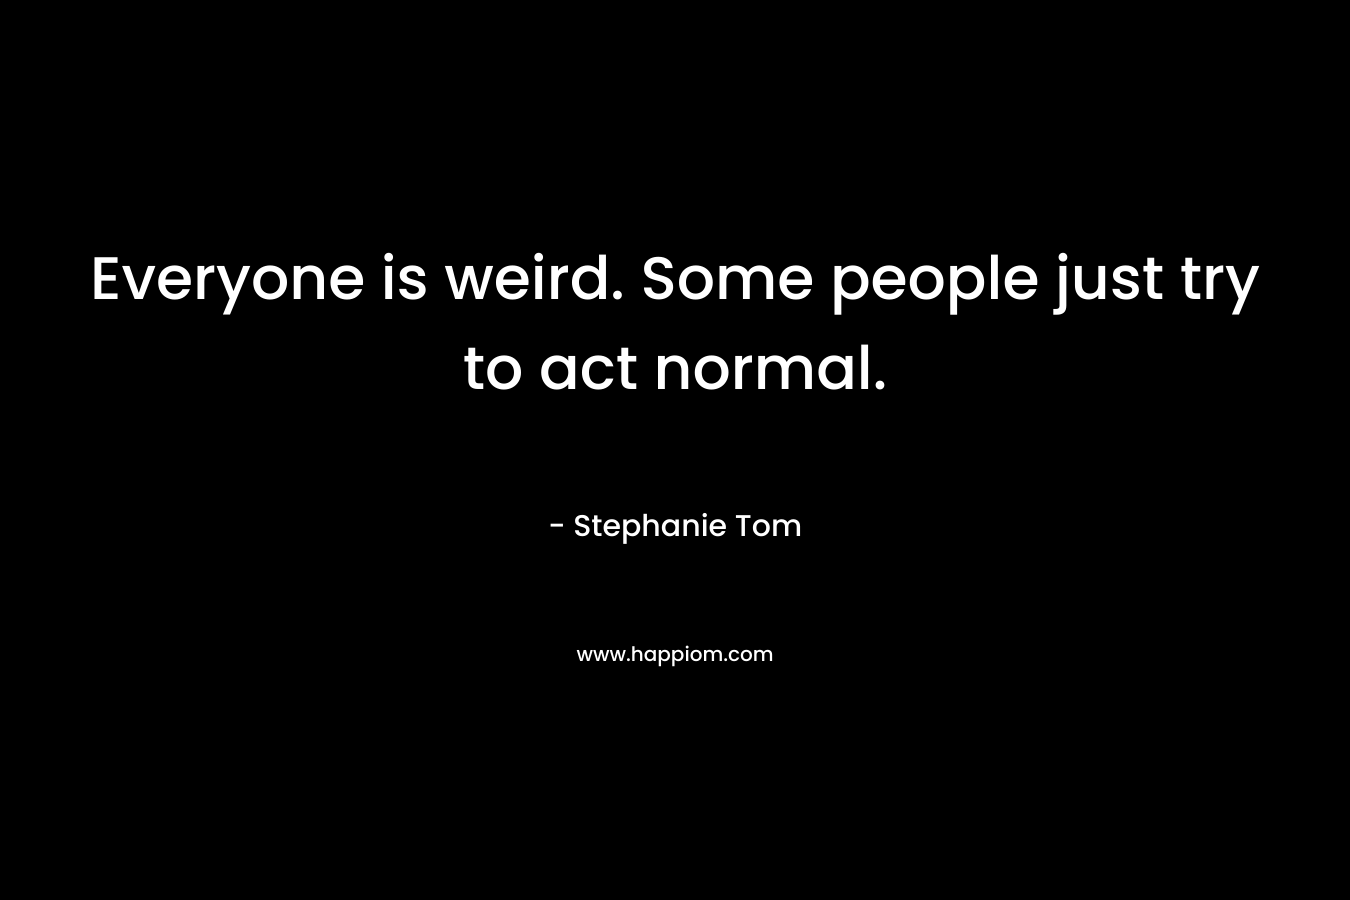 Everyone is weird. Some people just try to act normal.